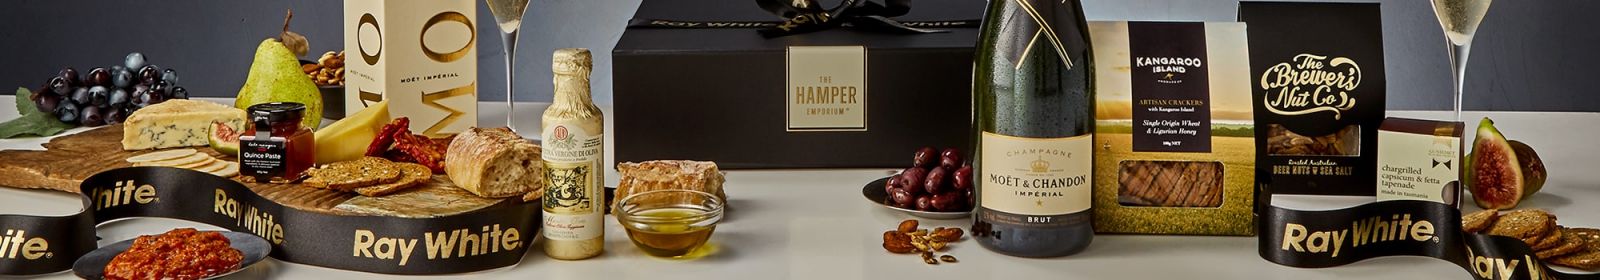 Corporate Gift hampers In Sydney 